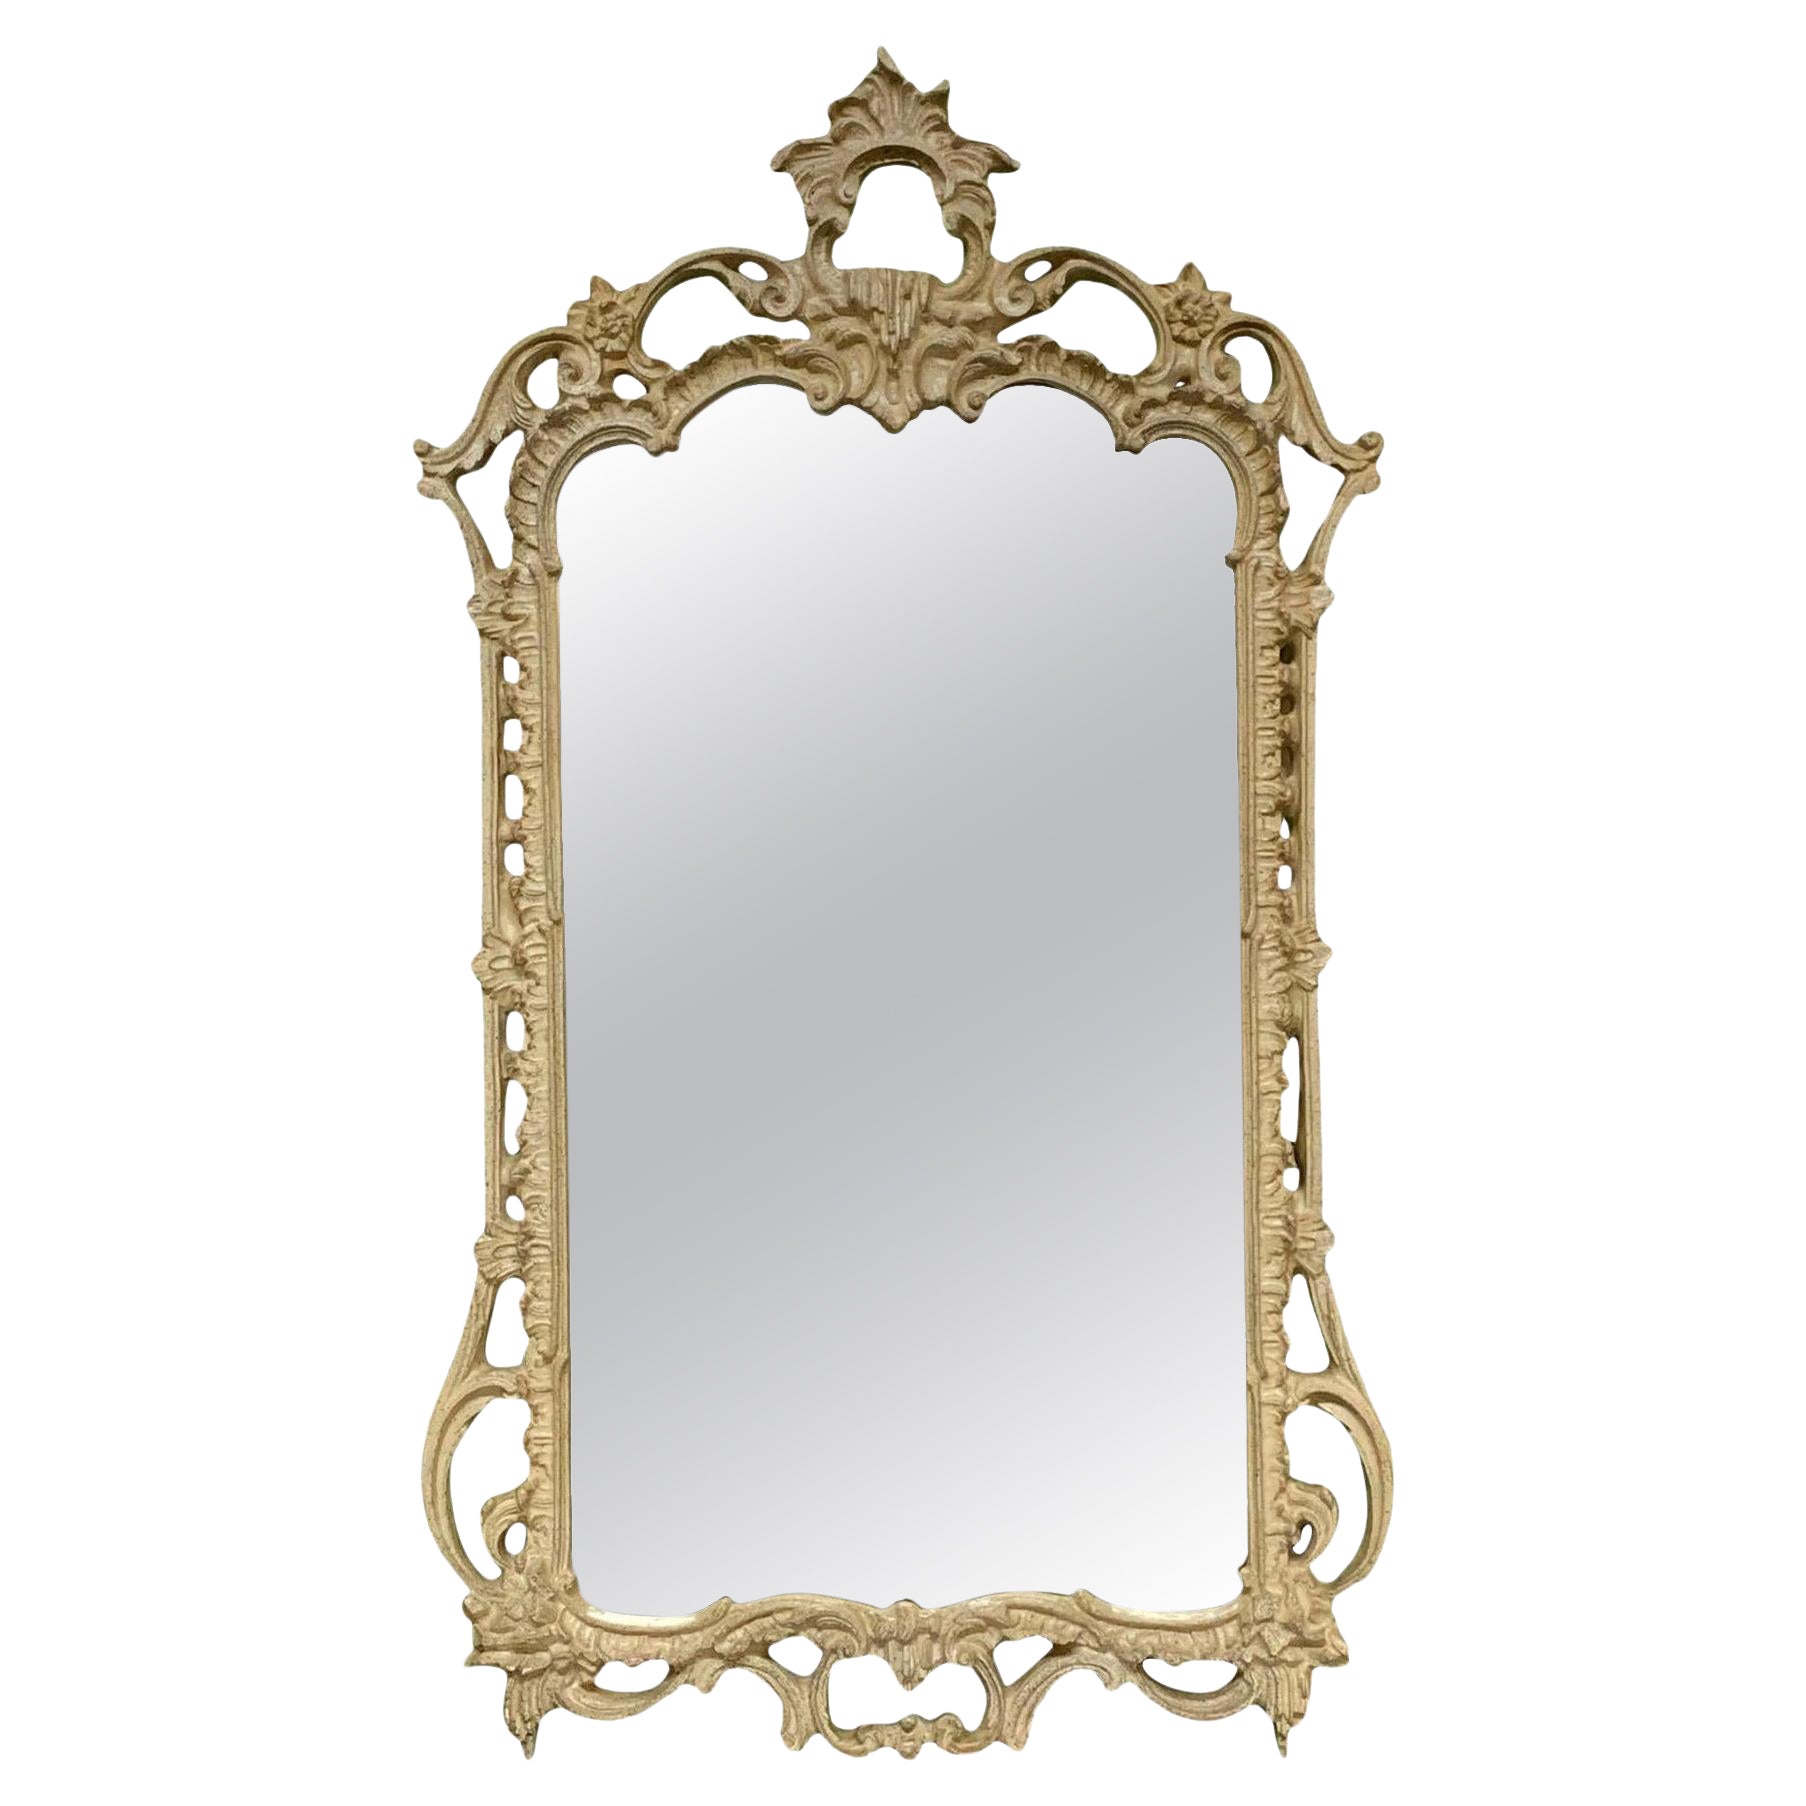 1980s French Rococo Style Baroque Wall Mirror For Sale